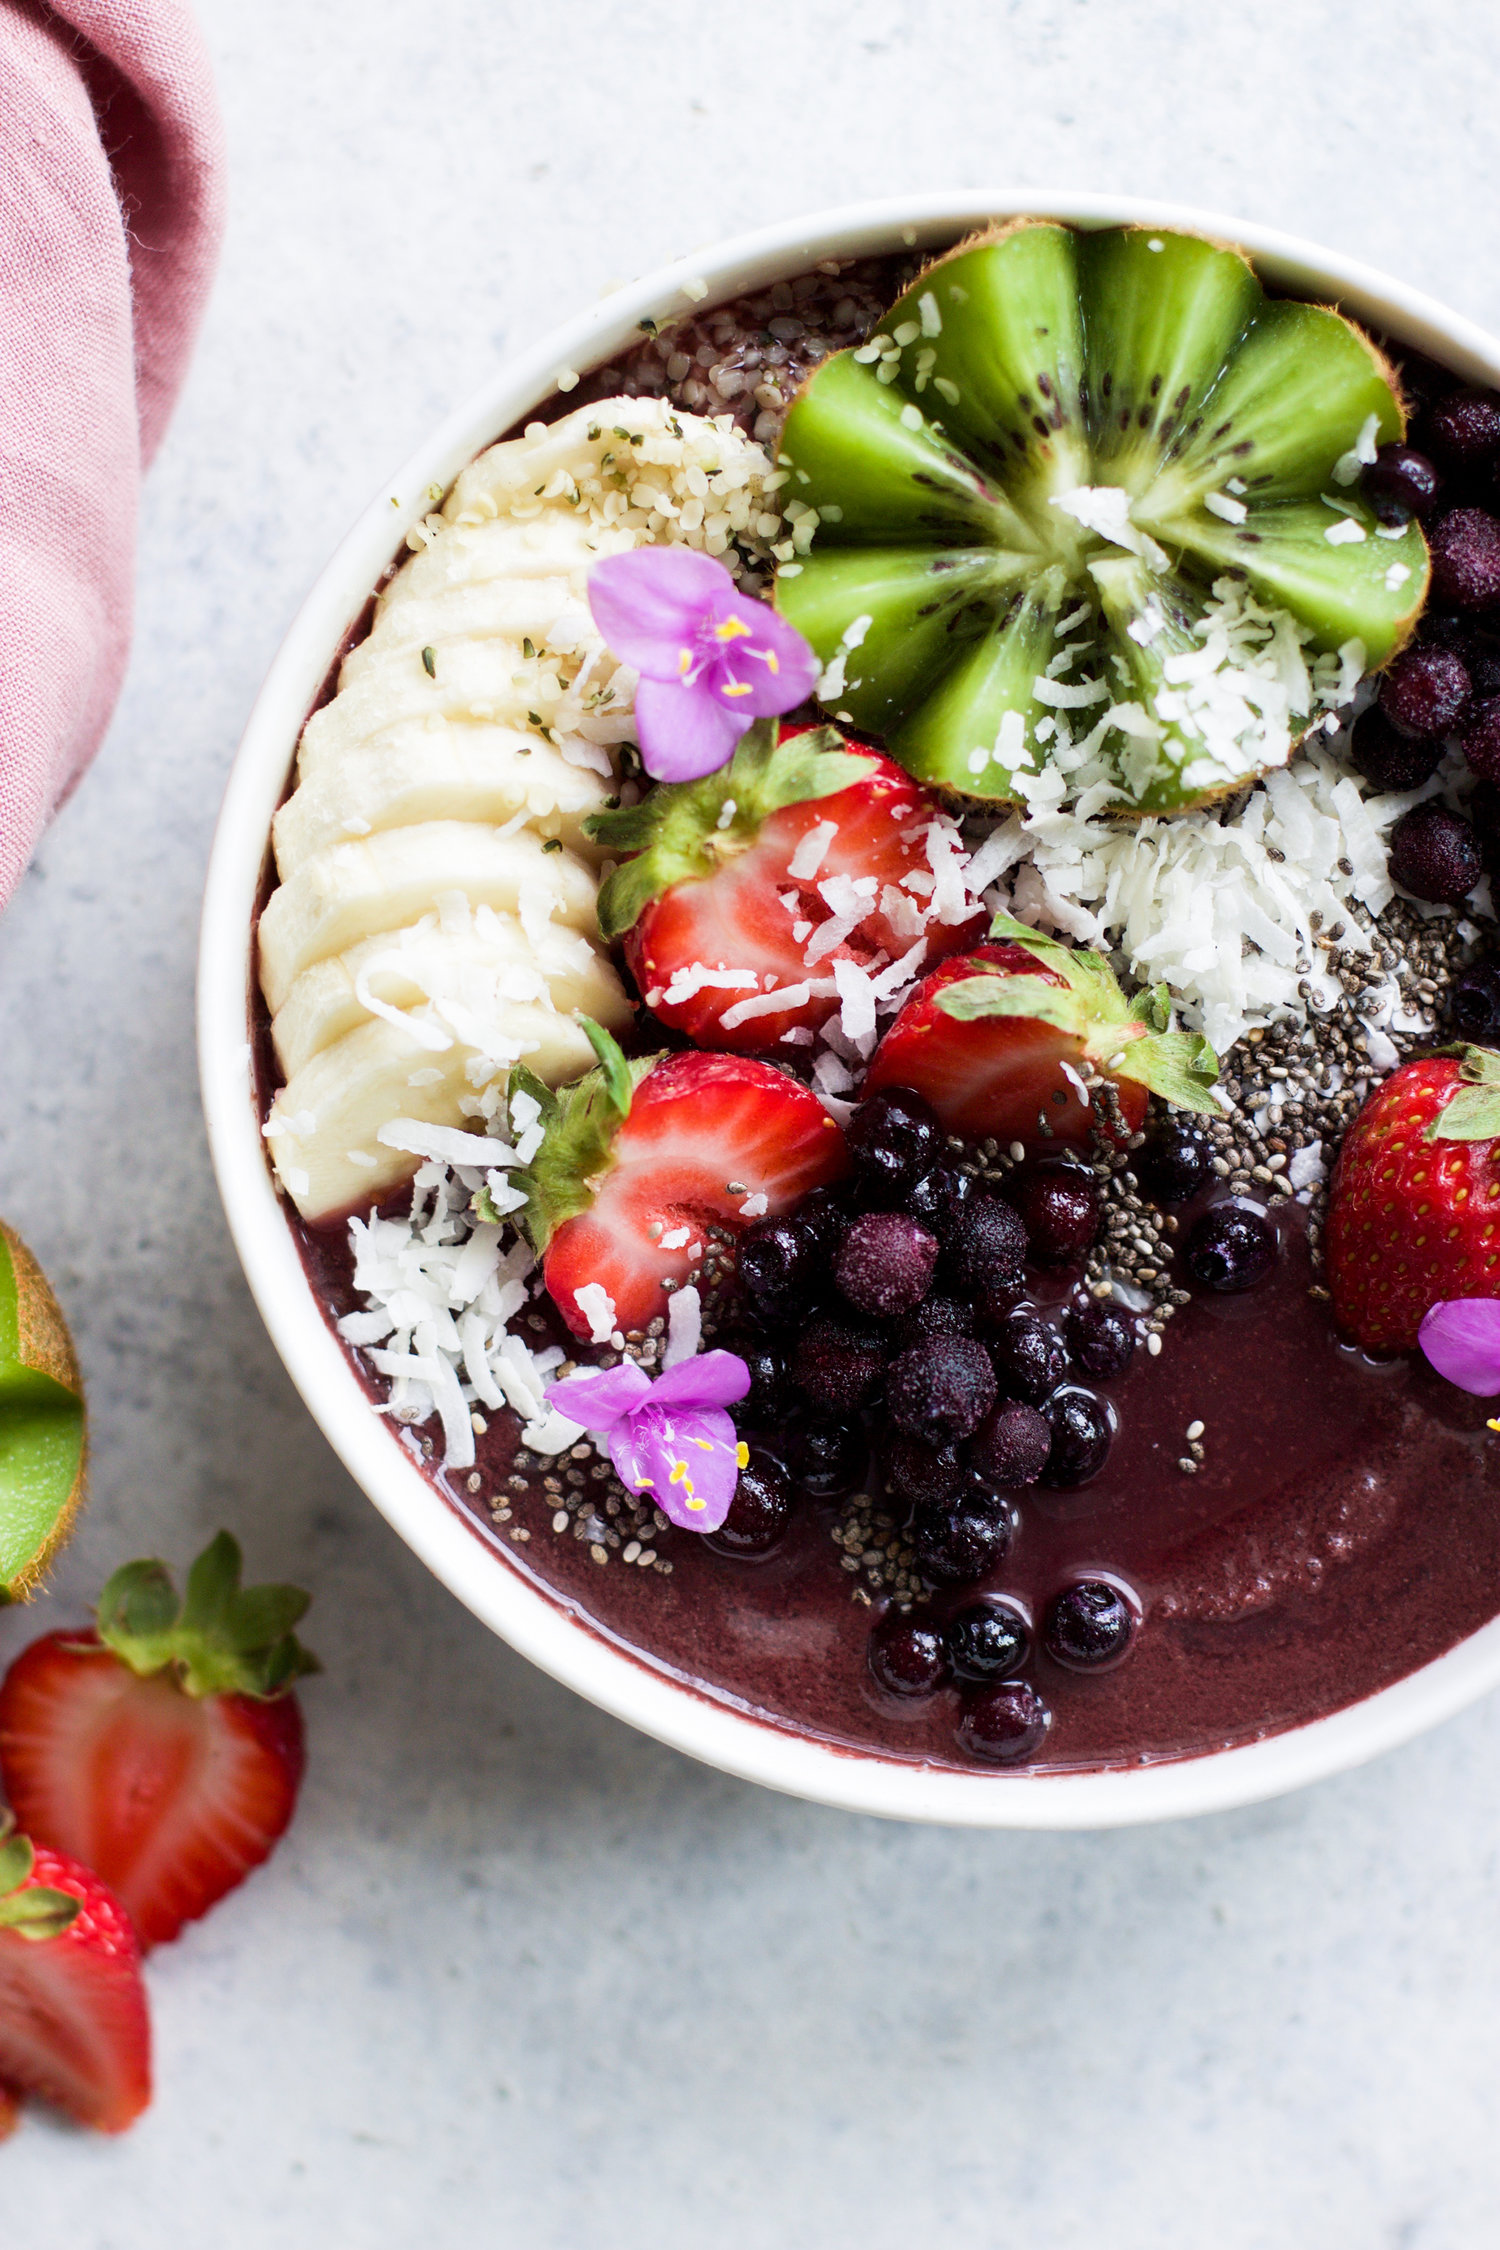 Easy Acai Smoothie Bowl Recipe - Love to be in the Kitchen